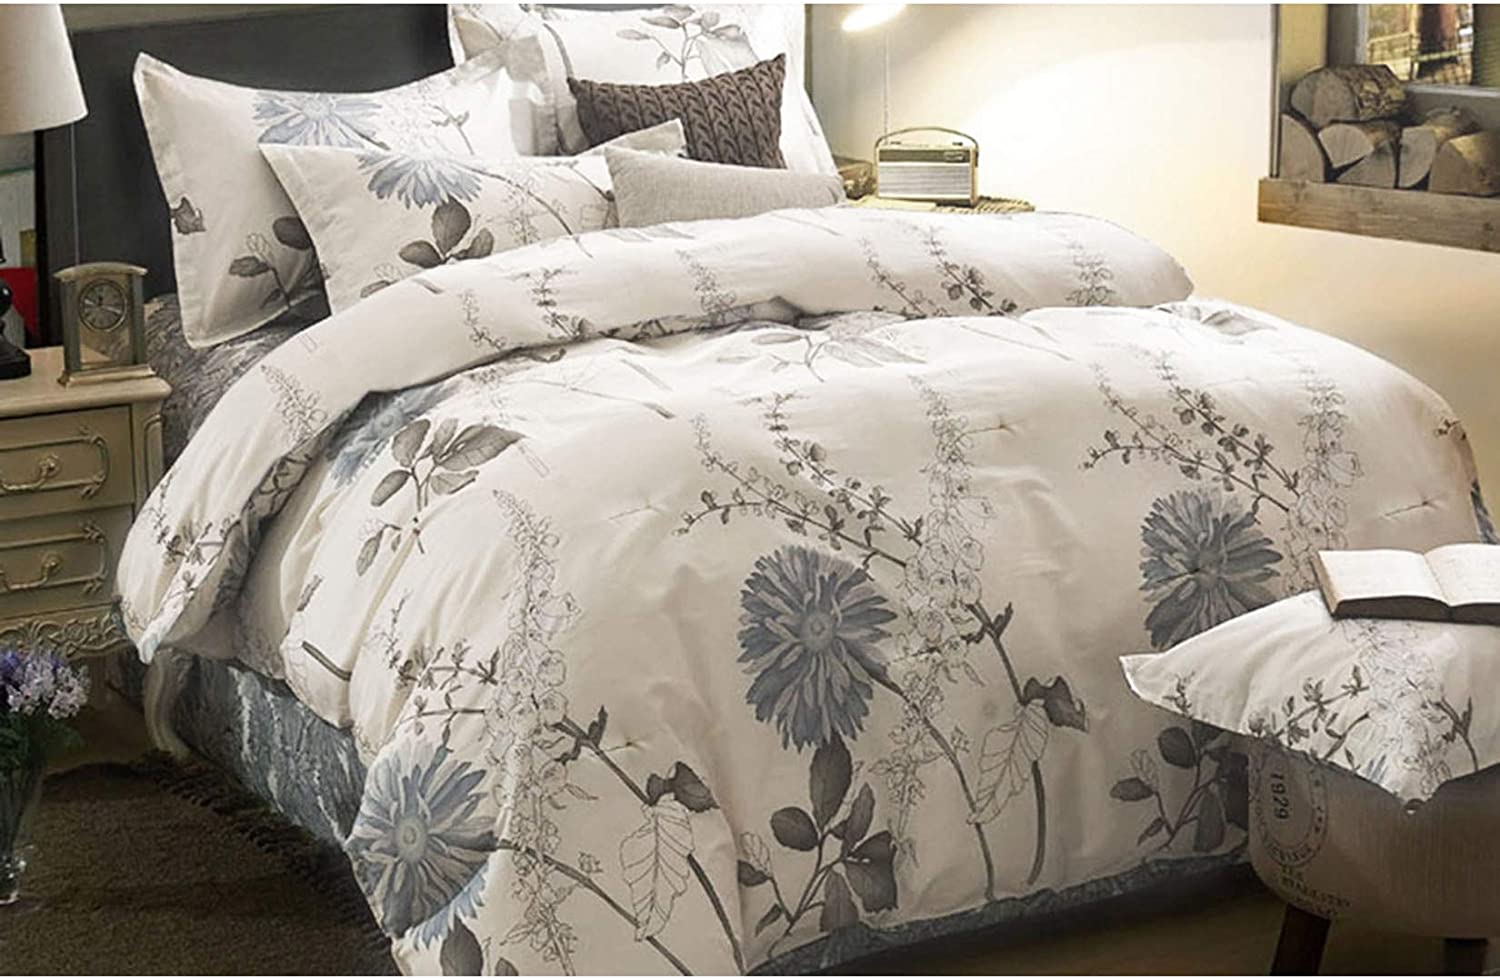 Price:$57.99  In Cloud - Floral Duvet Cover Set, 100% Cotton Bedding, Botanical Flowers Pattern Printed, with Zipper Closure (3pcs, California King Size) : Home & Kitchen